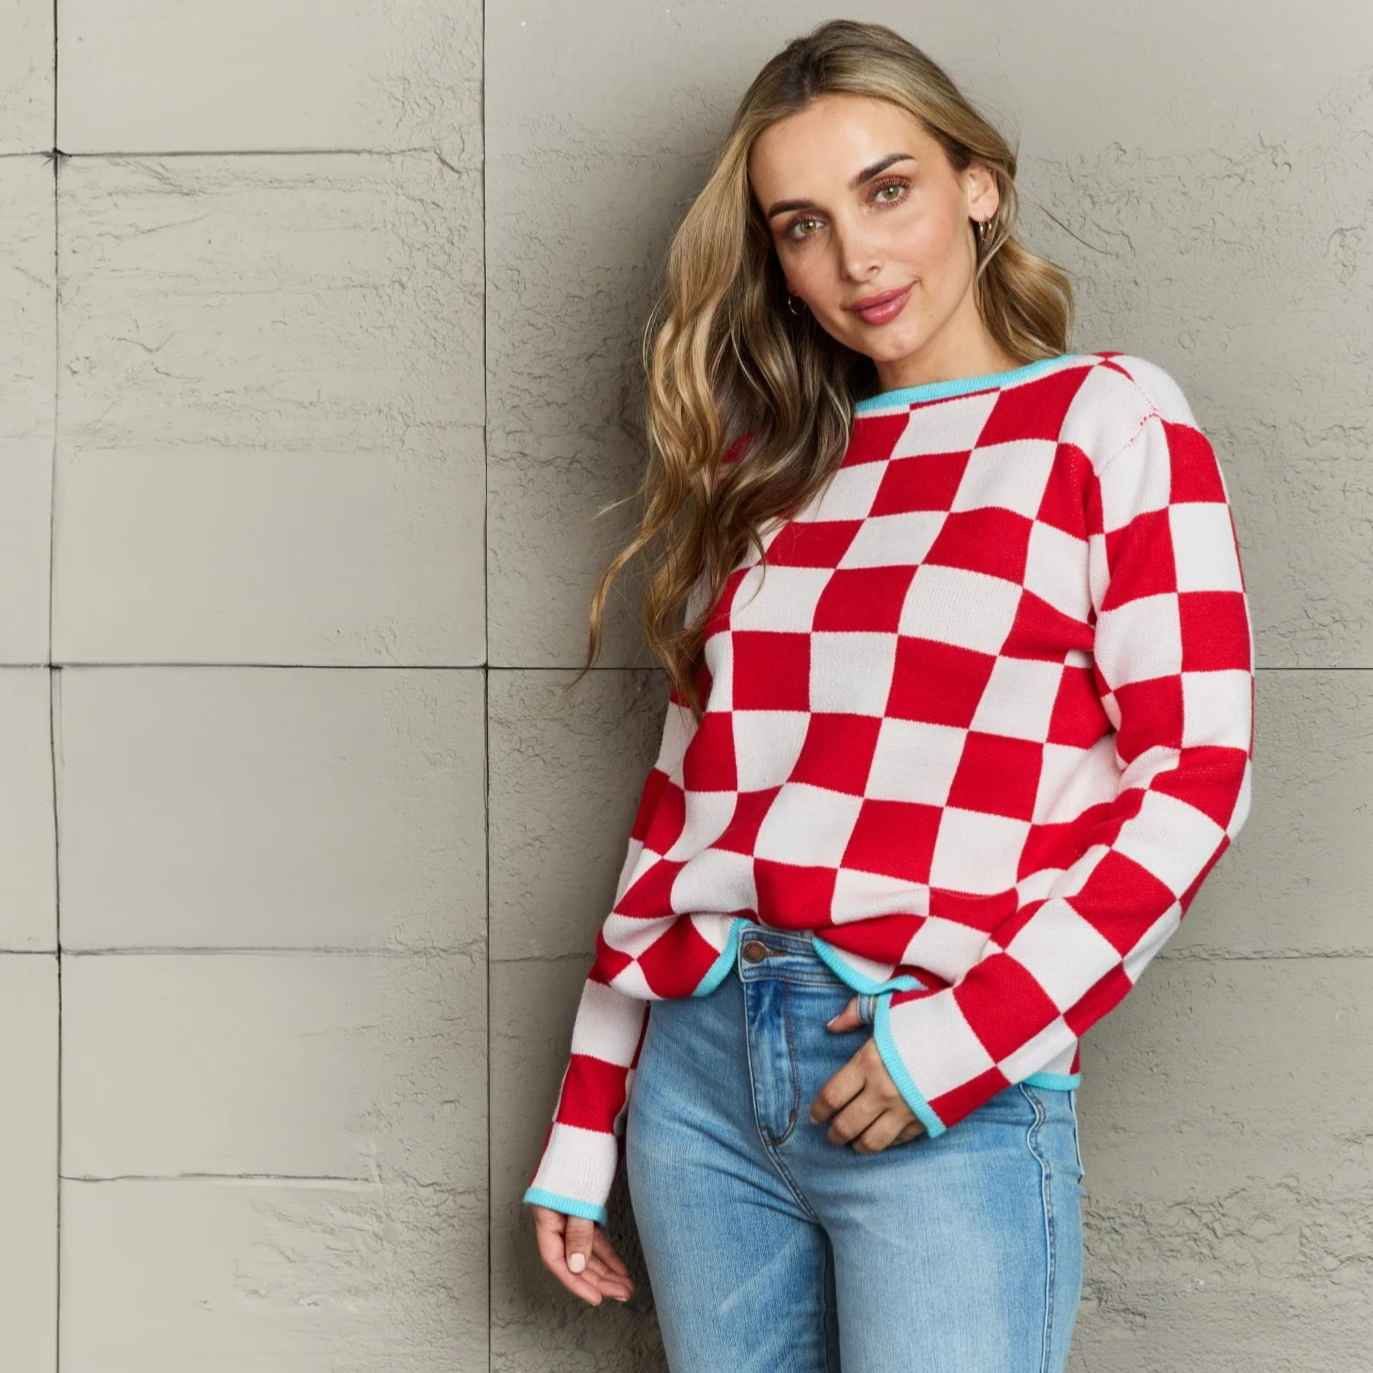 girl wearing red checkered sweater with light blue piping detail